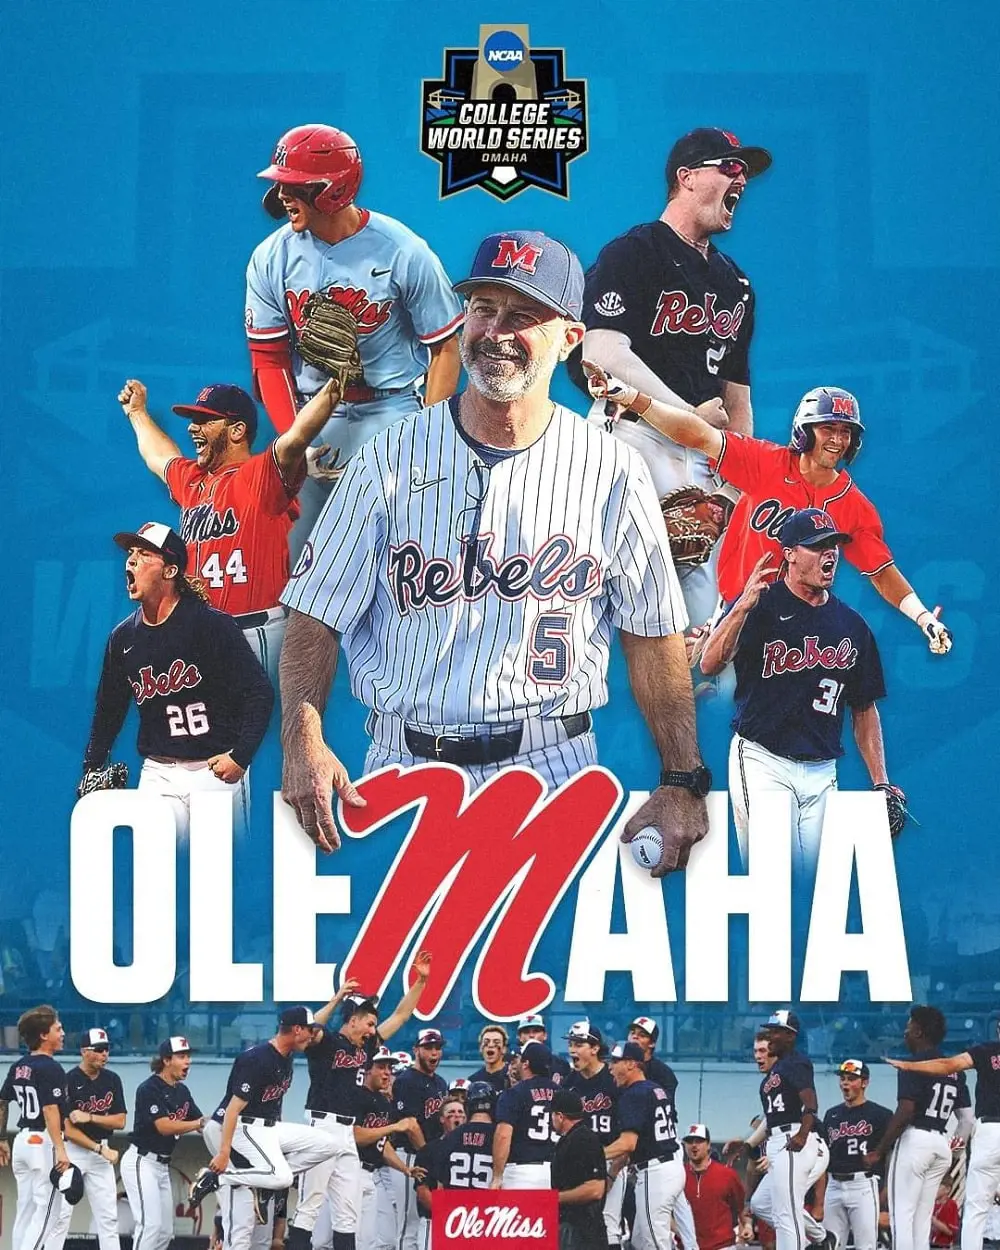 The University of Mississippi defeated Oklahoma in straight games to be crowned Champions.